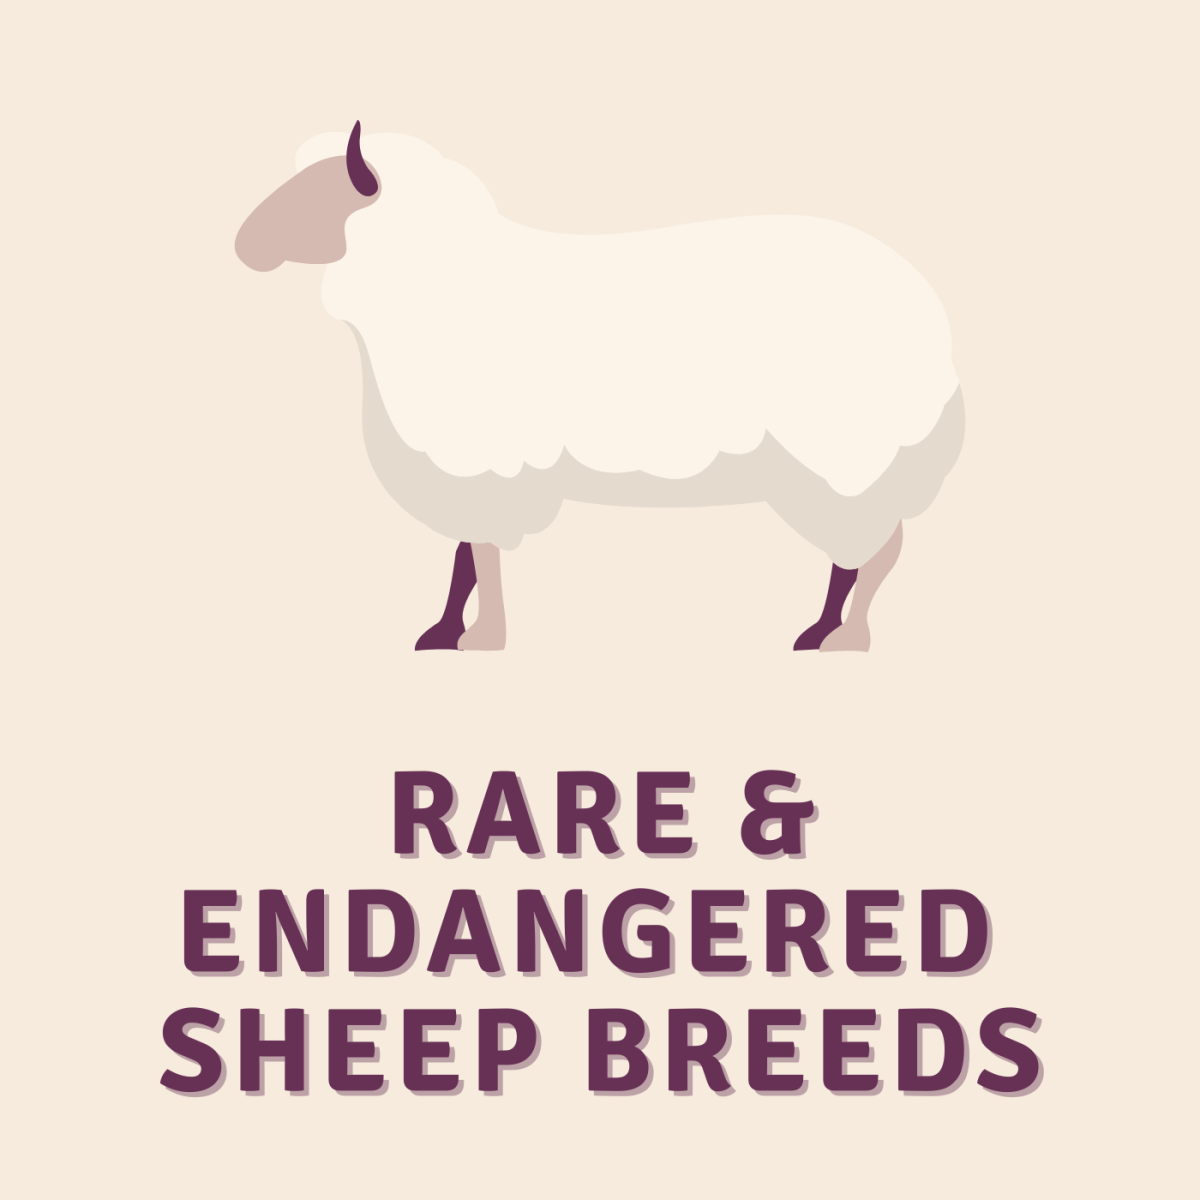 A list of rare and endangered sheep breeds